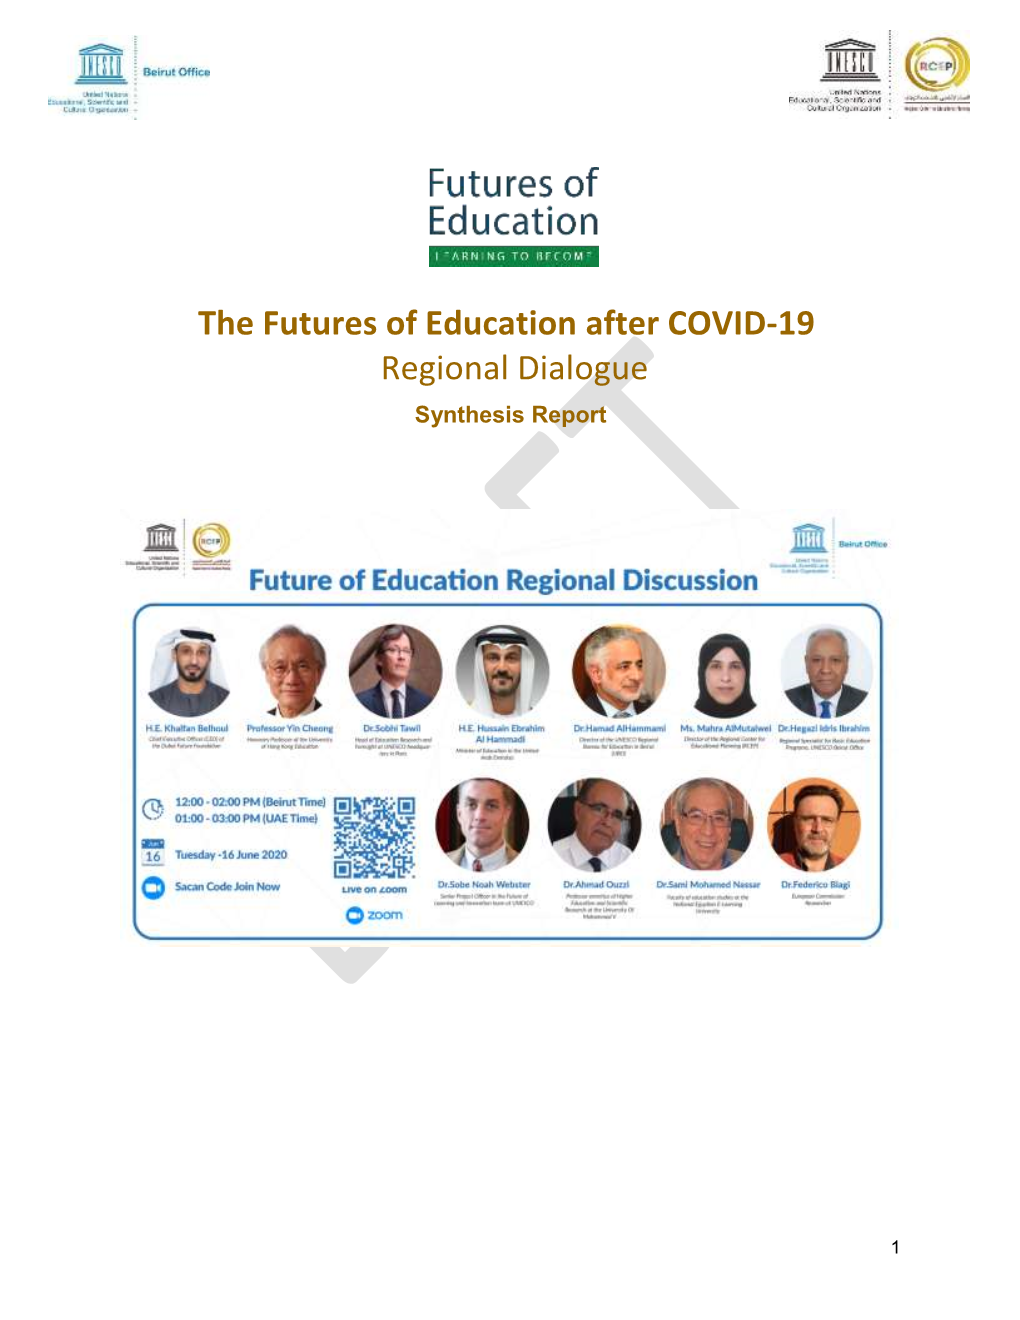 The Futures of Education After COVID-19 Regional Dialogue Synthesis Report